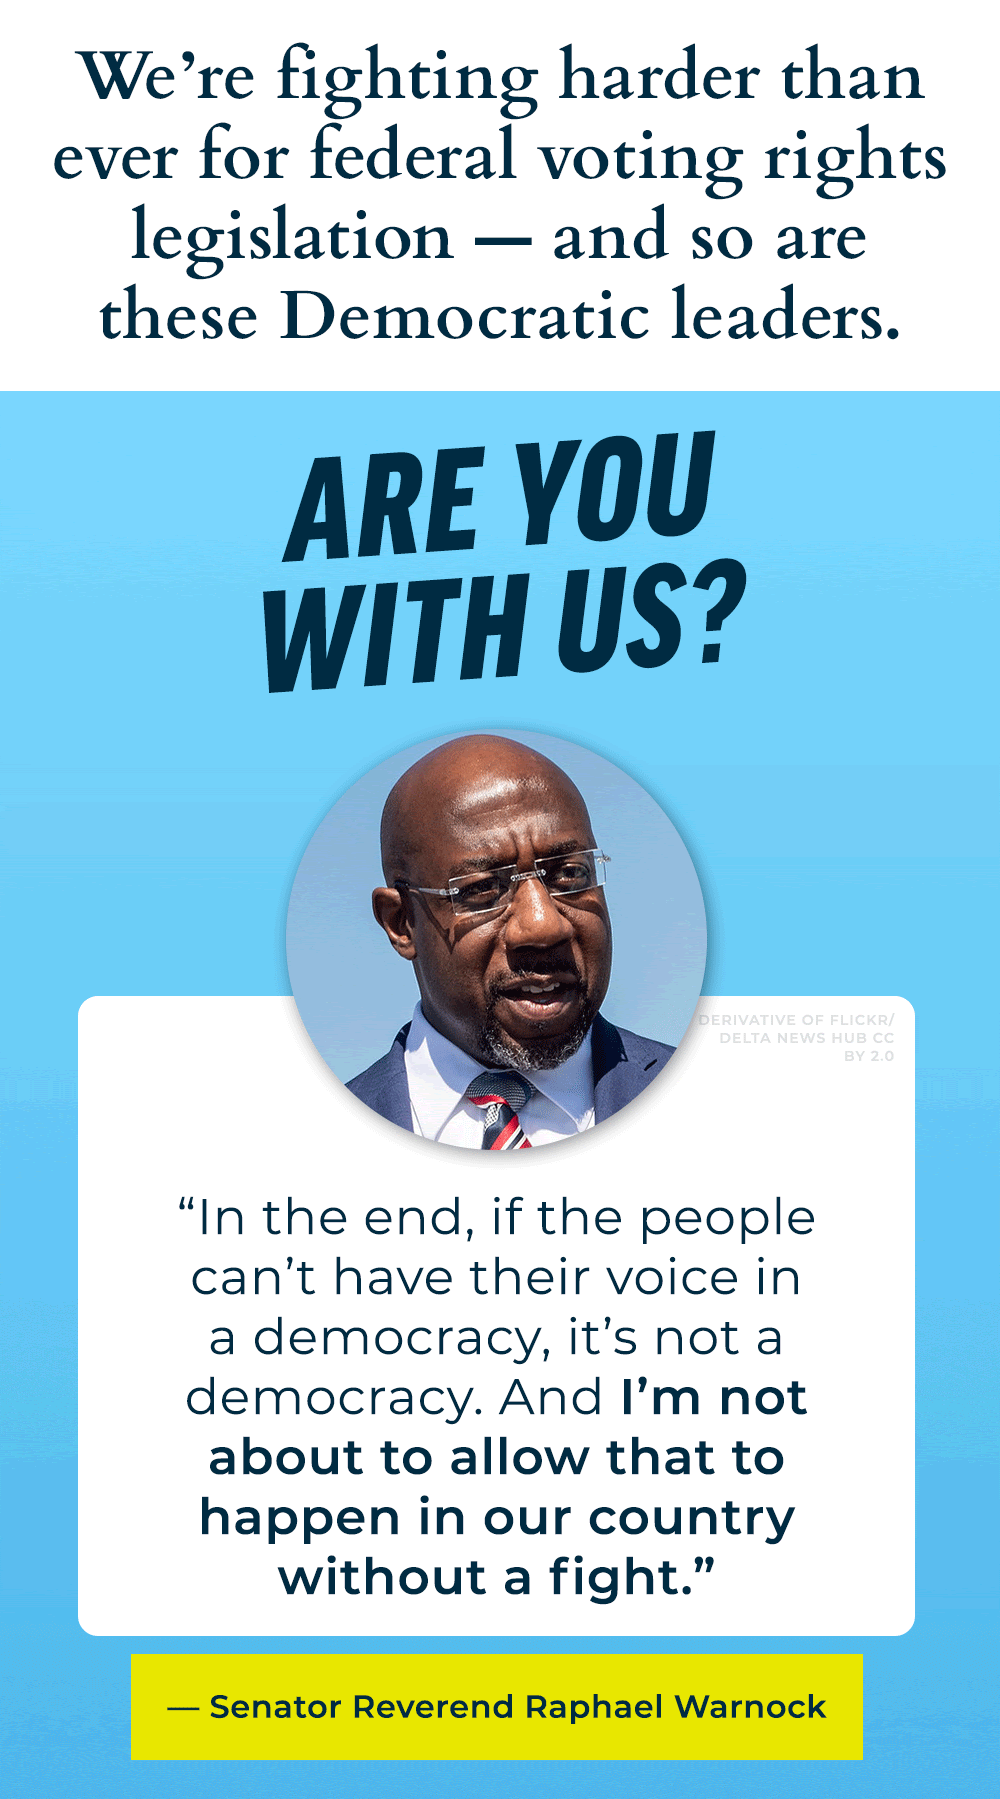 We're fighting harder than ever for federal voting rights legislation -- and so are these Democratic leaders. Are you with us? Sen Warnock: In the end, if the people can't have their voice in a democracy, it's not a democracy. And I'm not about to allow that to happen in our country without a fight.